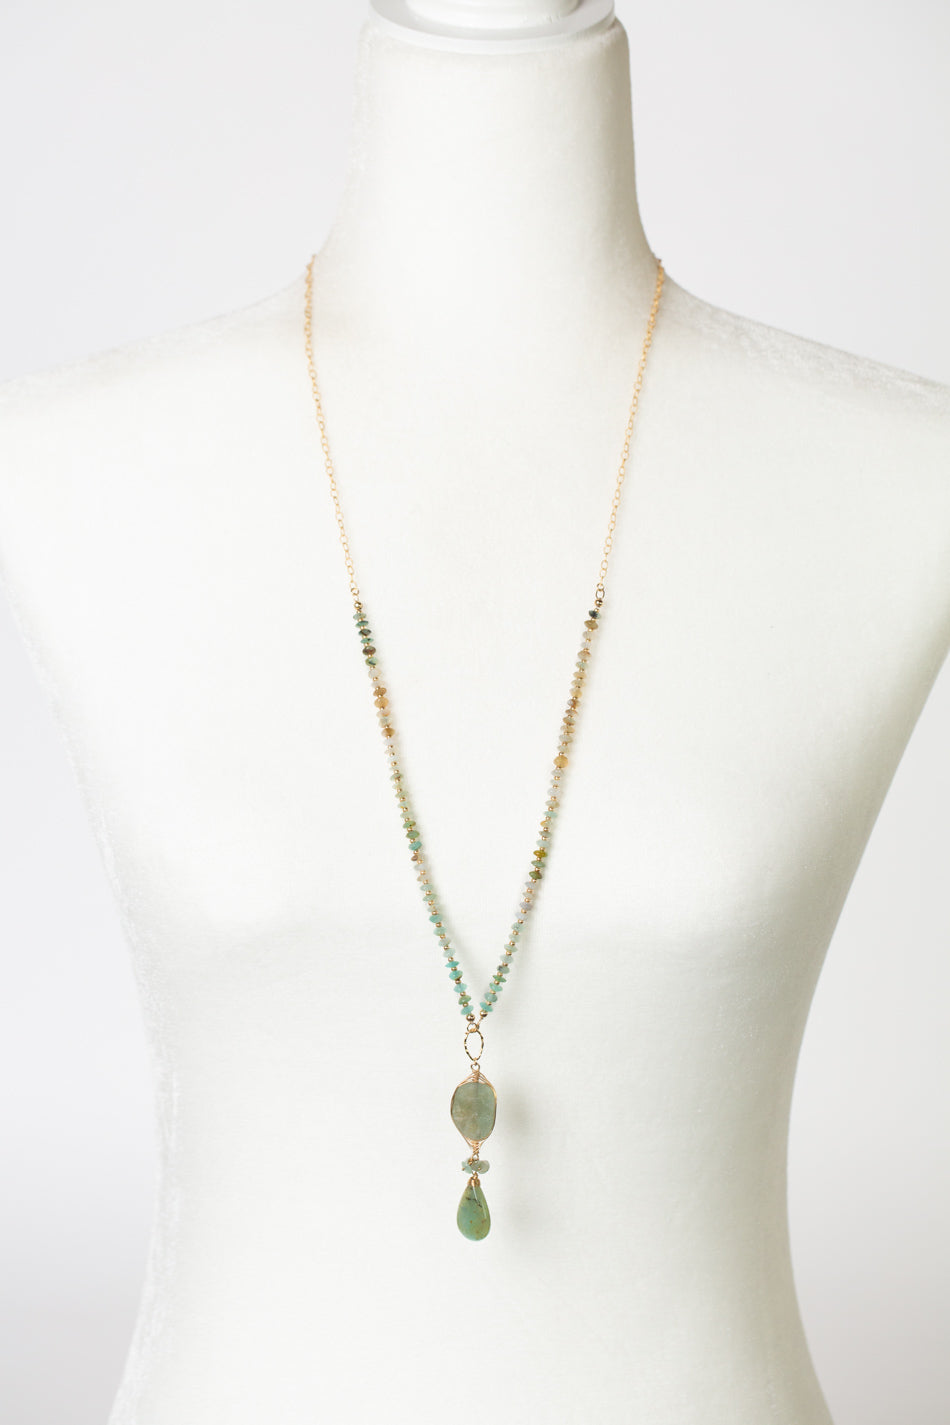 One Of A Kind 30-32" Opalina, Aquamarine with Peruvian Opal Statement Necklace